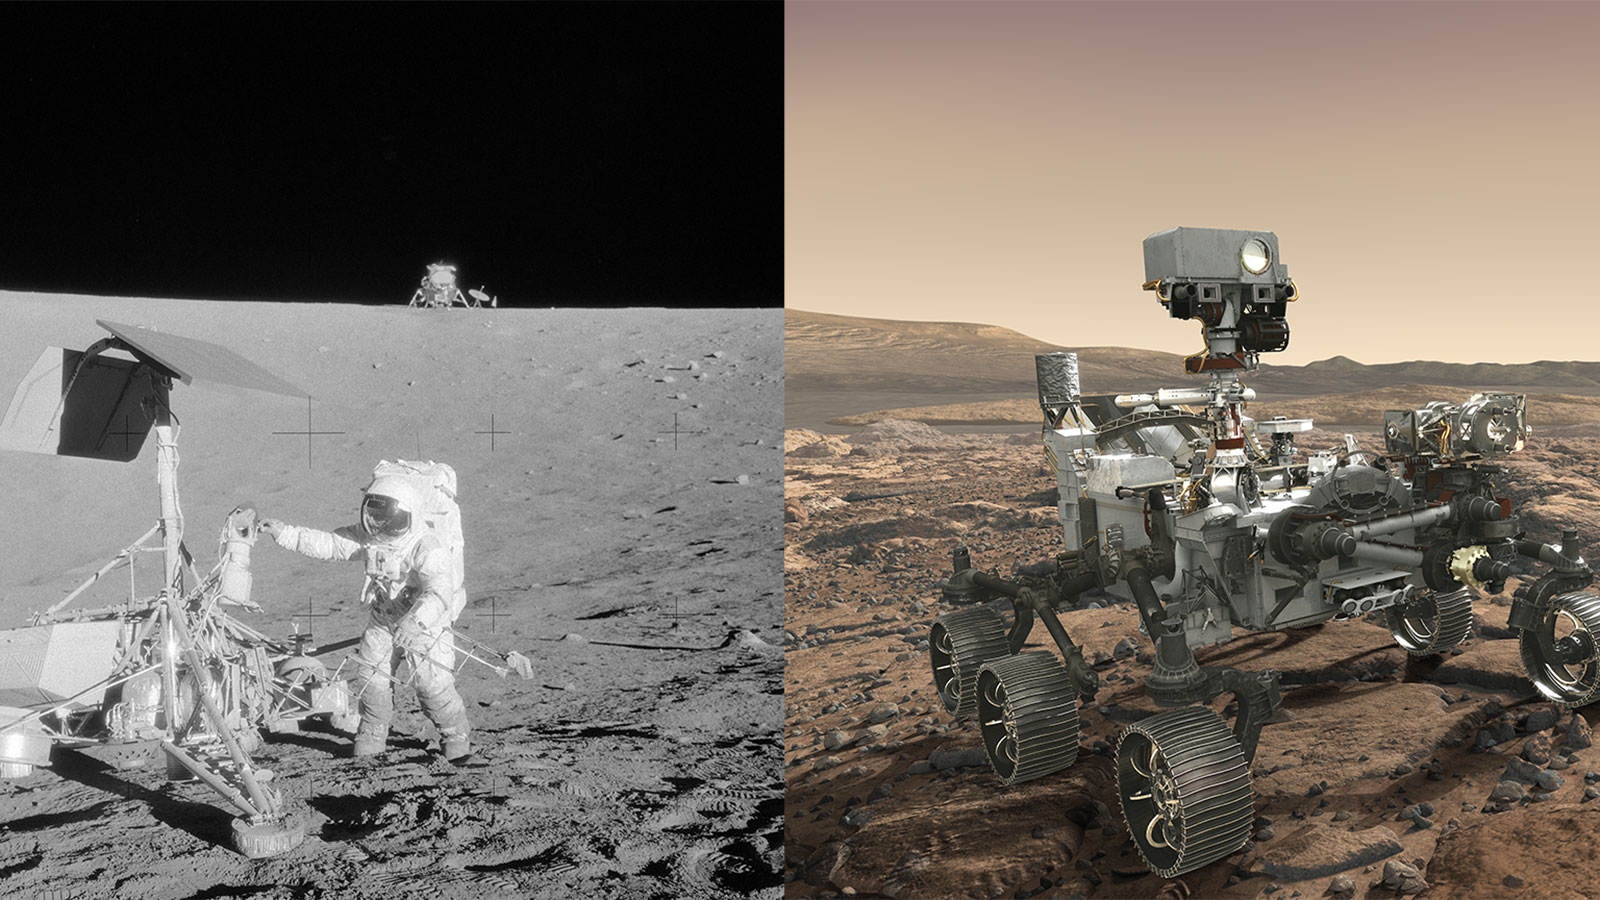 (Left) Apollo 12 astronaut Charles “Pete” Conrad Jr. stands beside NASA's Surveyor 3 spacecraft. (Right) Mars 2020 rover, seen here in an artist's concept, will make history's most accurate landing on a planetary body when it lands at Mars' Jezero Crater on Feb. 18, 2021.